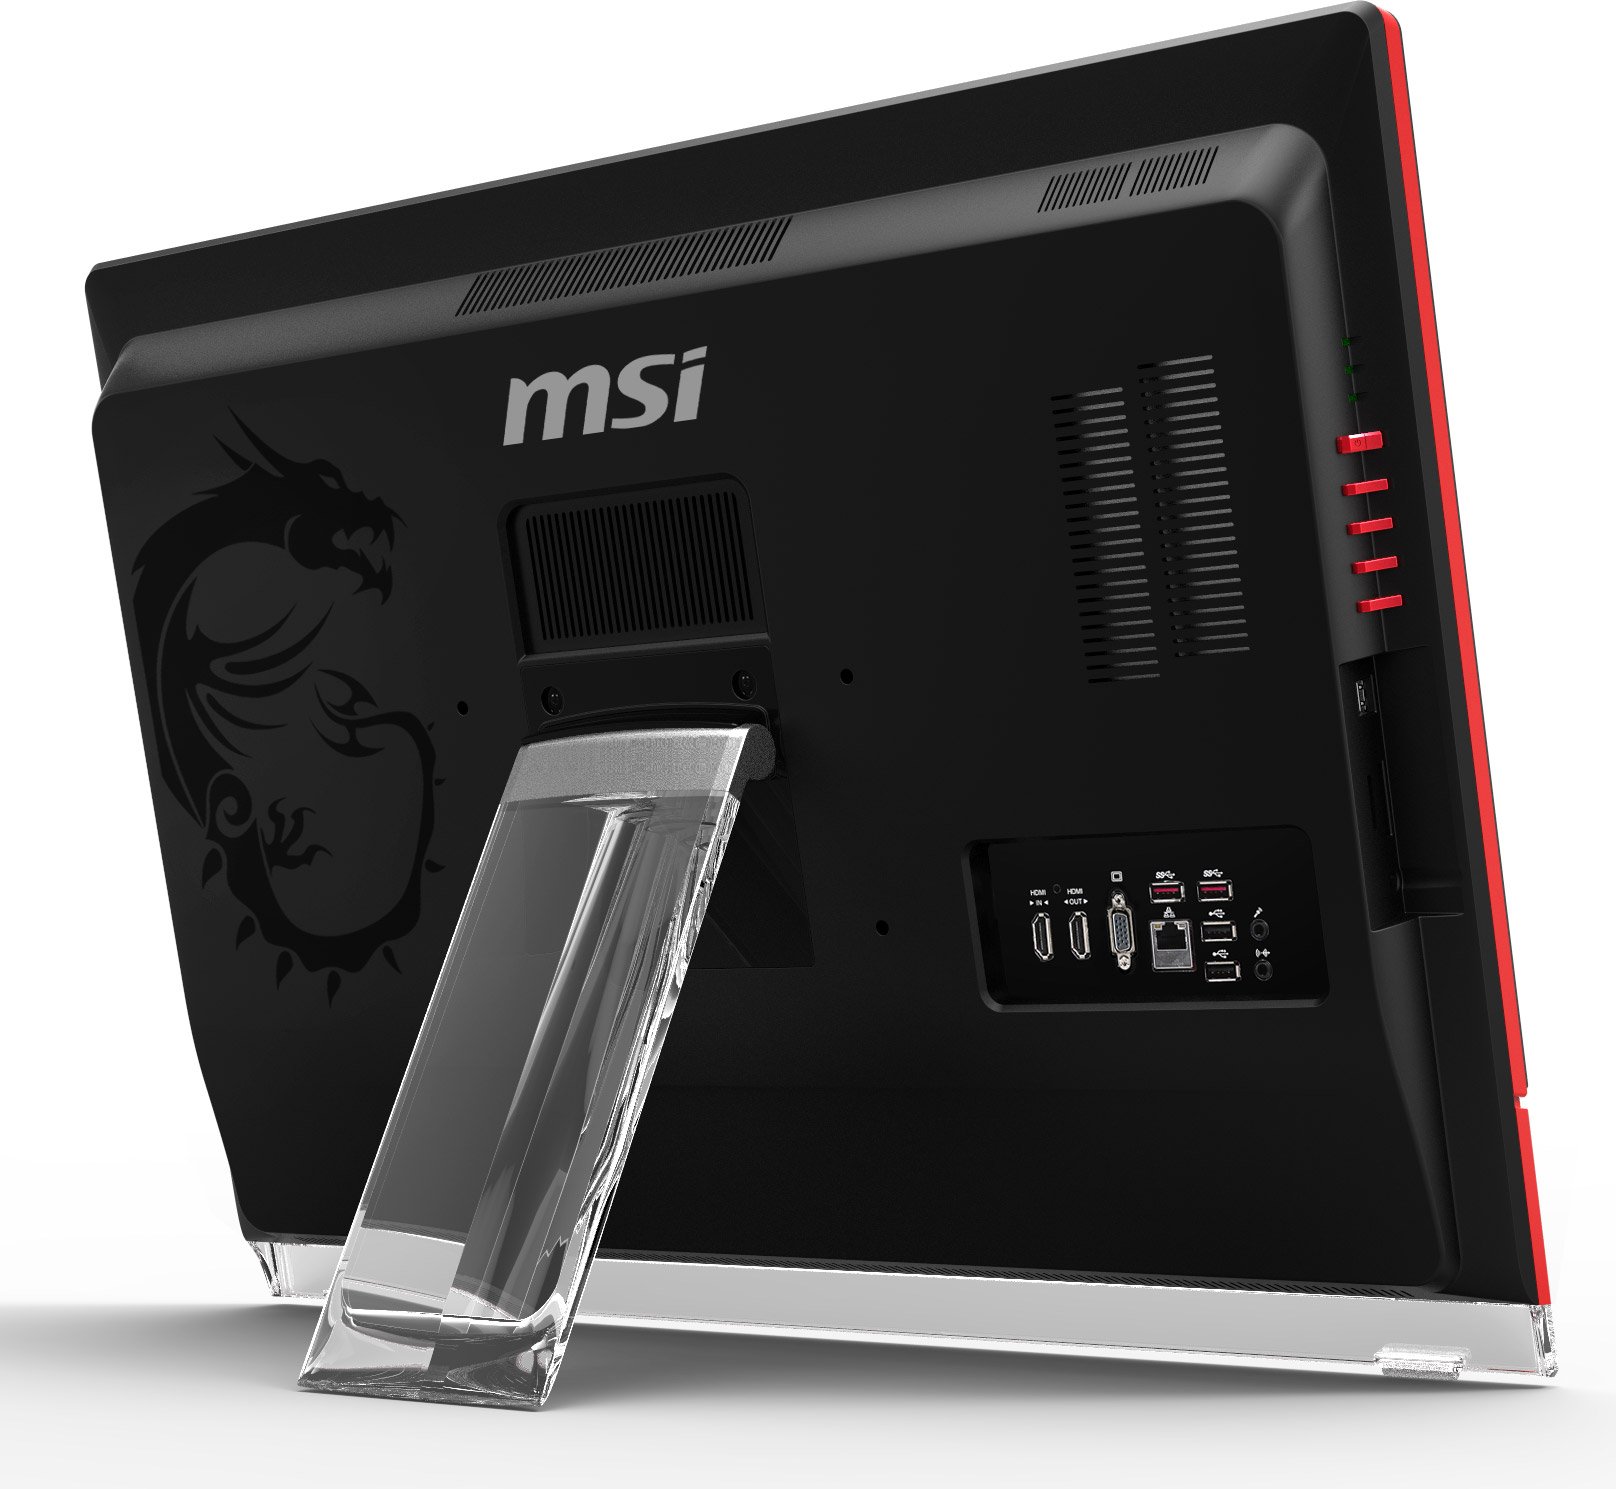 Gaming all in ones. MSI ag270. Моноблок MSI ag270. MSI ag270 2ql-215ru. MSI моноблок i7.